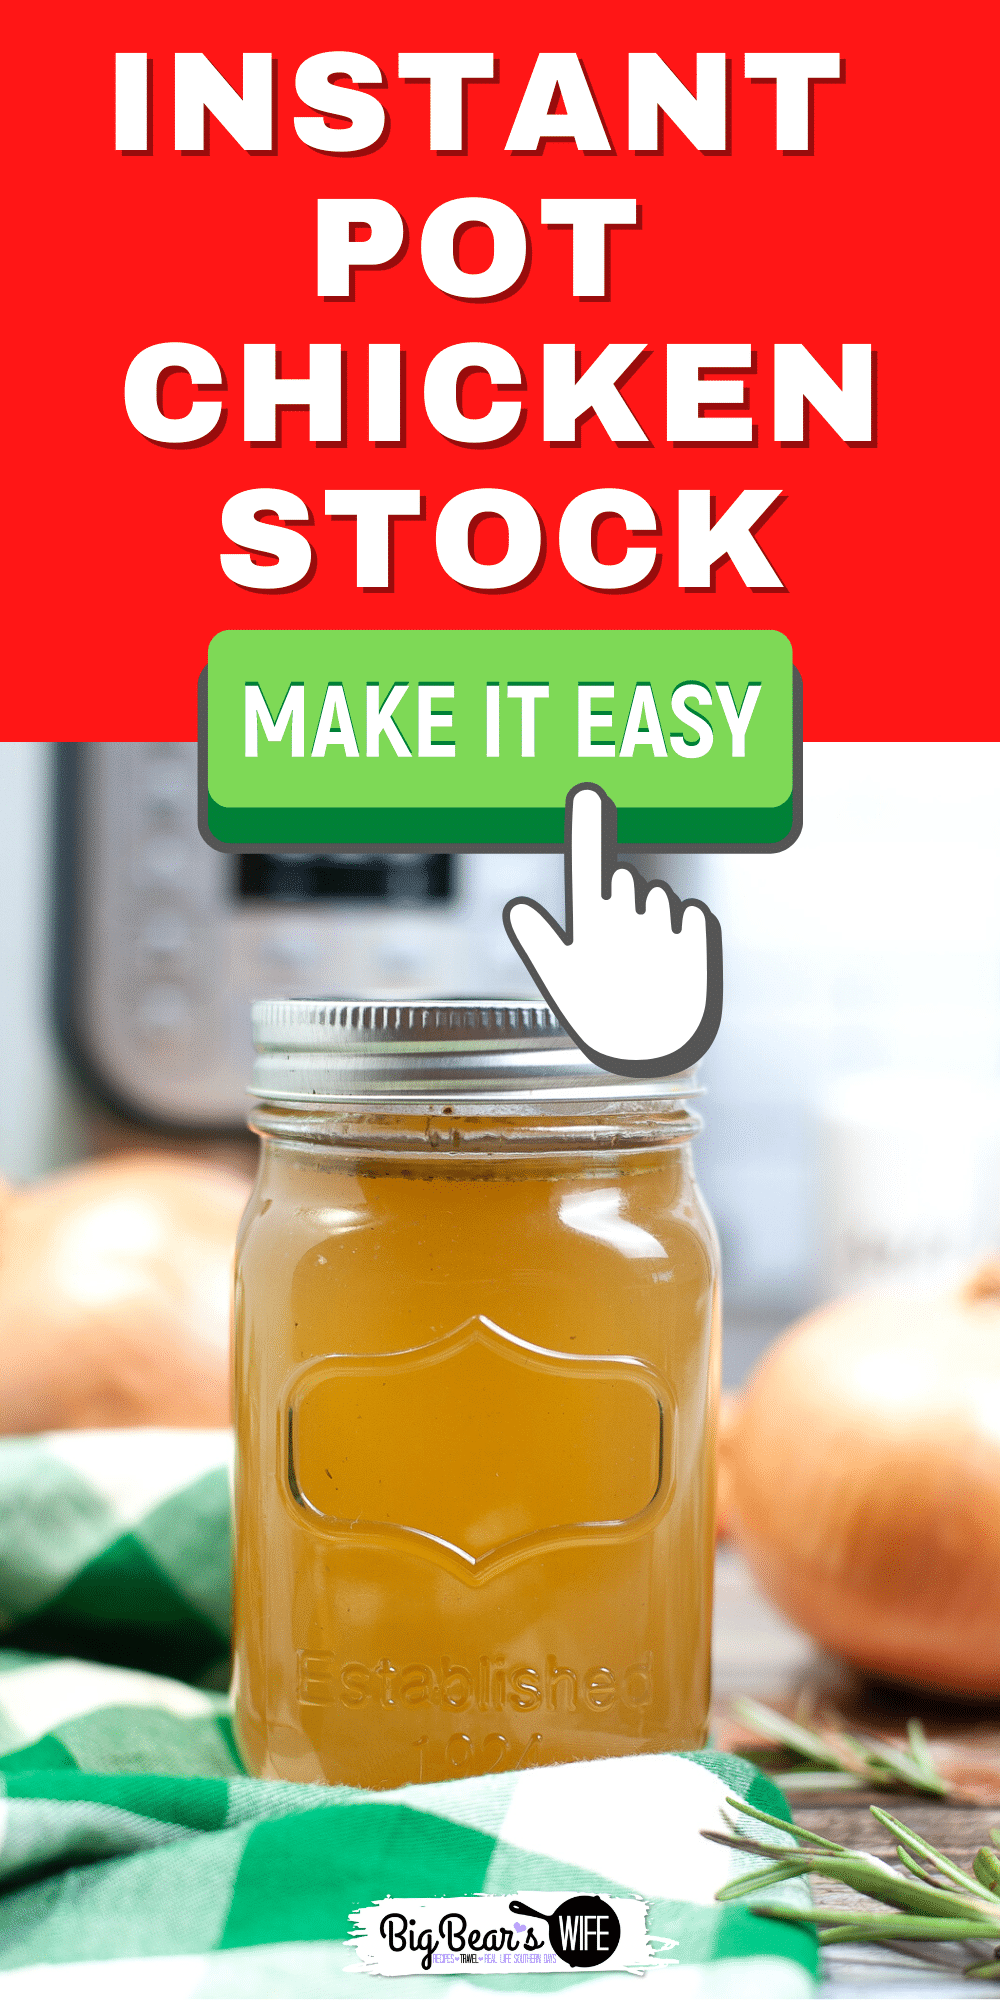 Don't toss those chicken bones into the trash! Turn them into the most amazing chicken stock with this easy recipe for Instant Pot Chicken Stock! Perfect for soups, casseroles, sauces and pot pies! via @bigbearswife